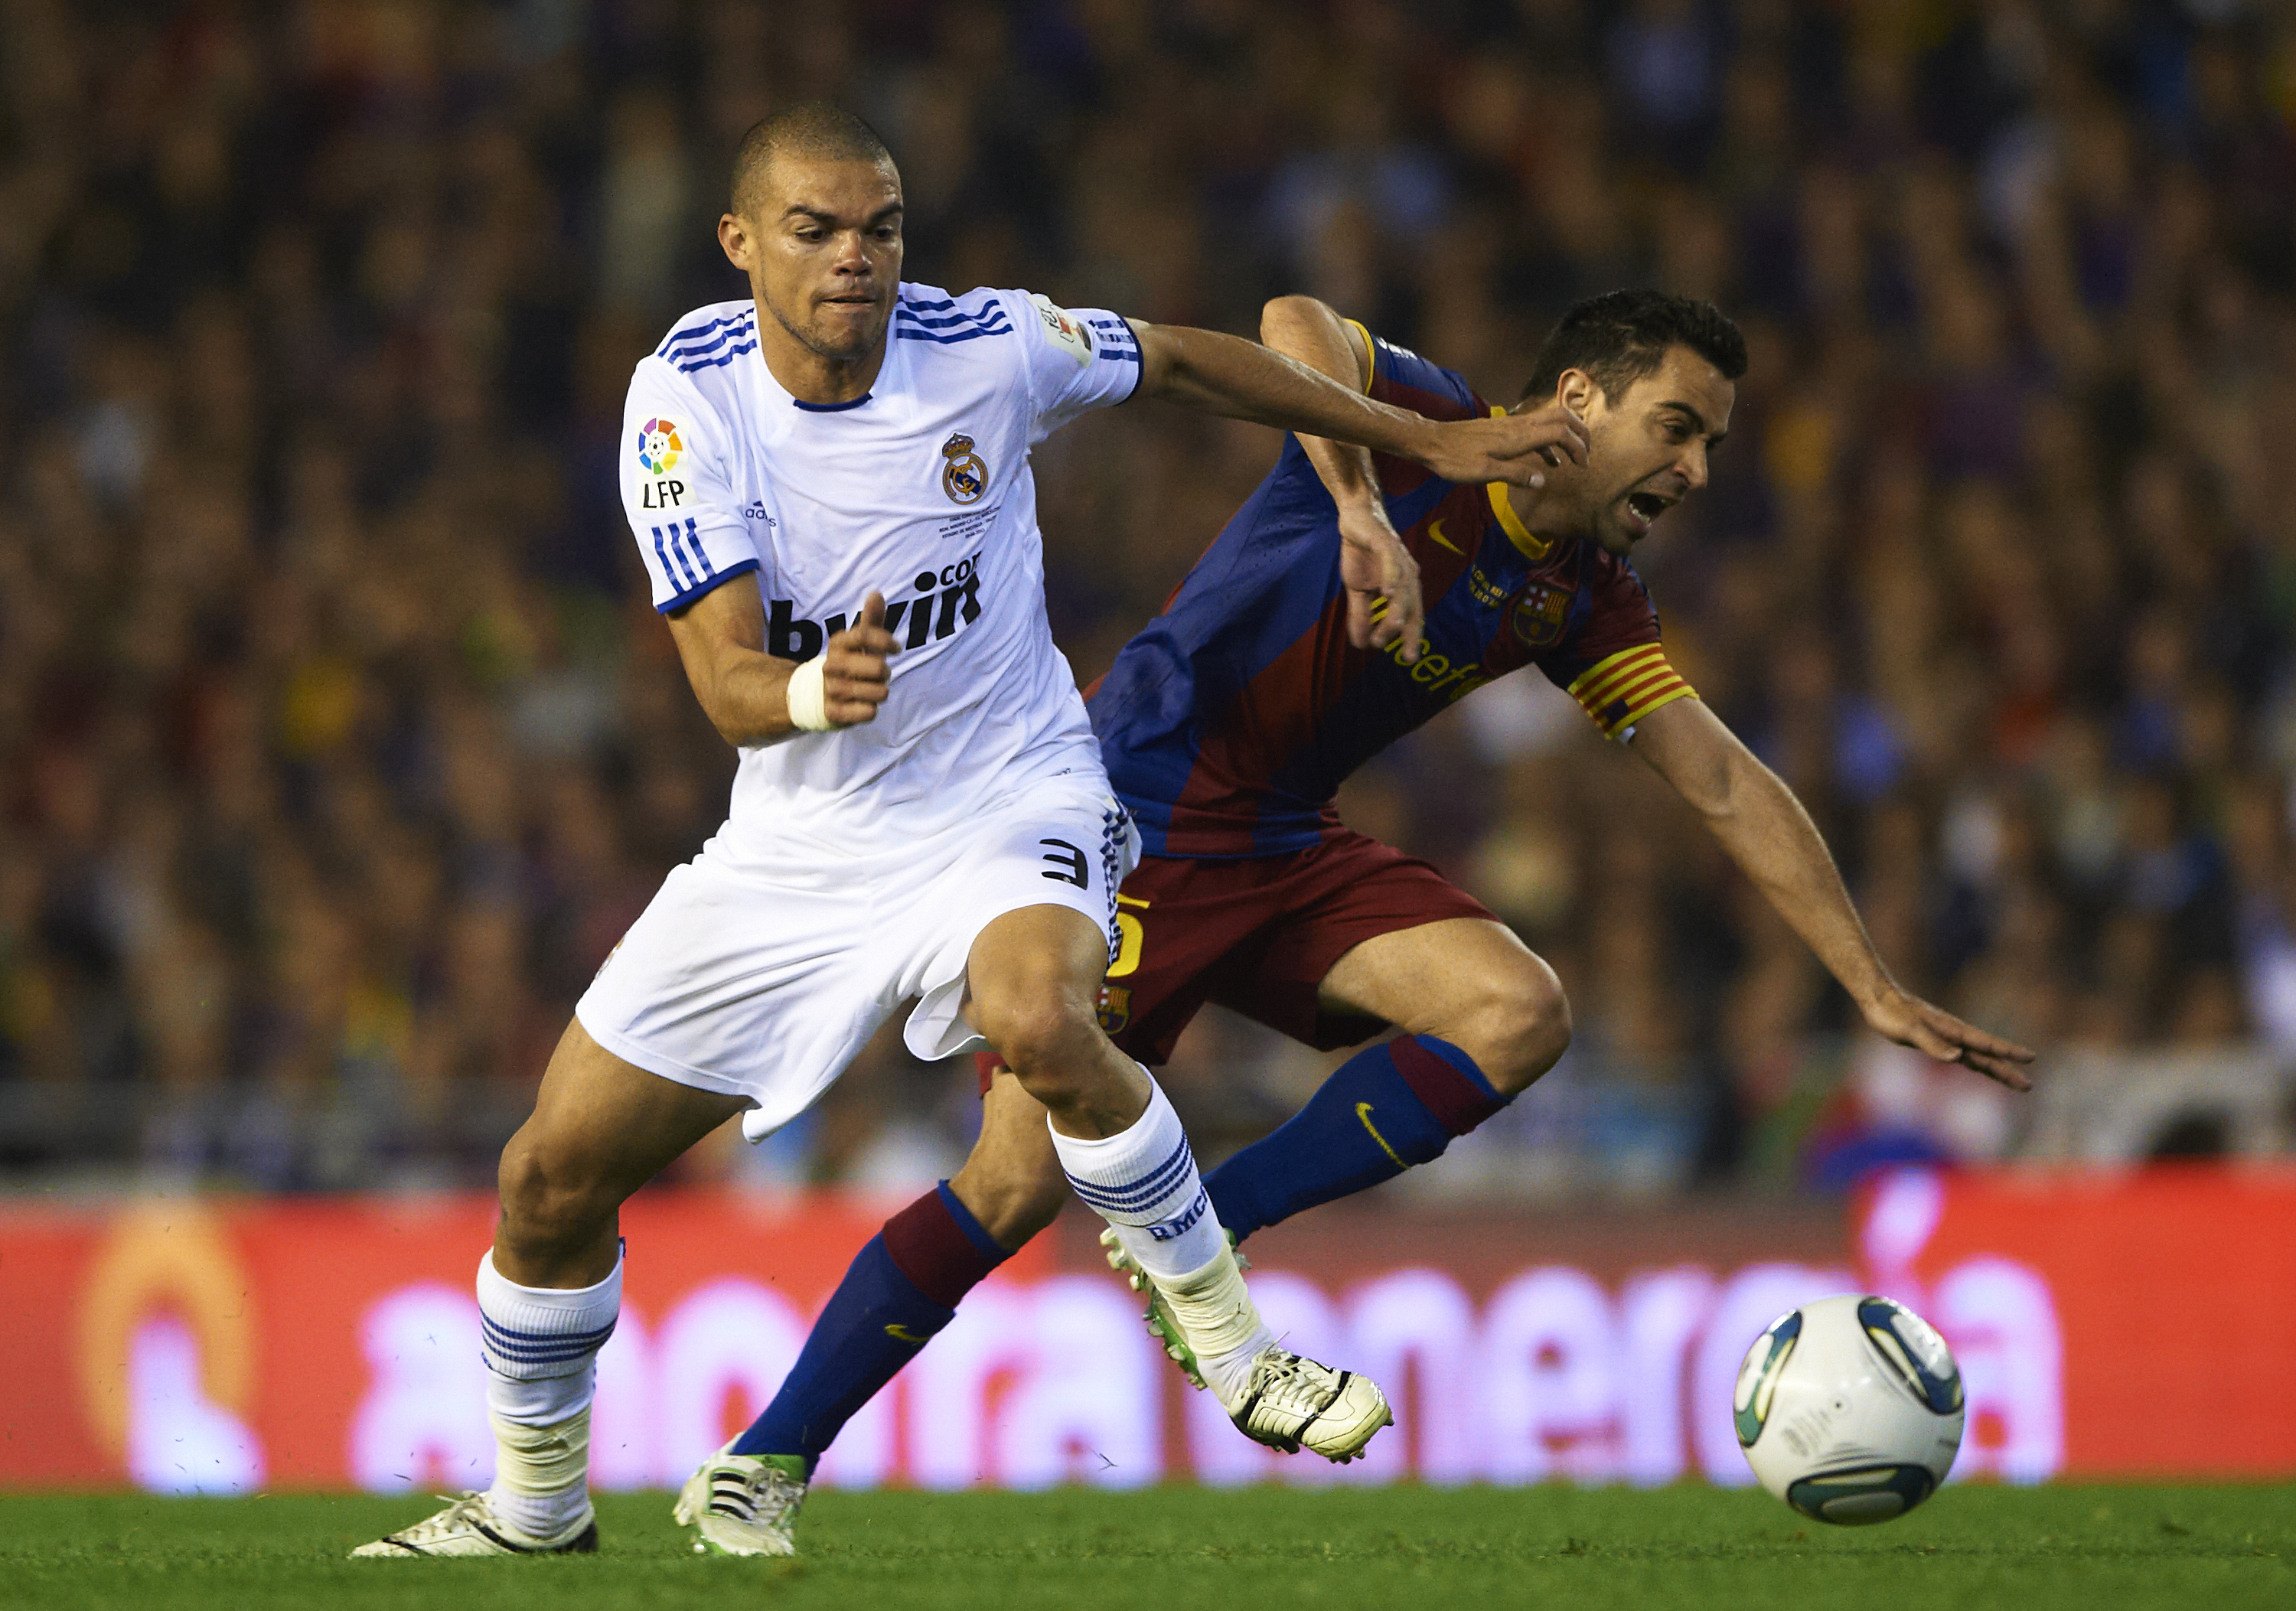 VALENCIA, BARCELONA - APRIL 20: Xavi Hernandez (r) of Barcelona and Pepe of Real Madrid competes for the ball during the Copa del Rey final match between Real Madrid and Barcelona at Estadio Mestalla on April 20, 2011 in Valencia, Spain.  (Photo by Manuel